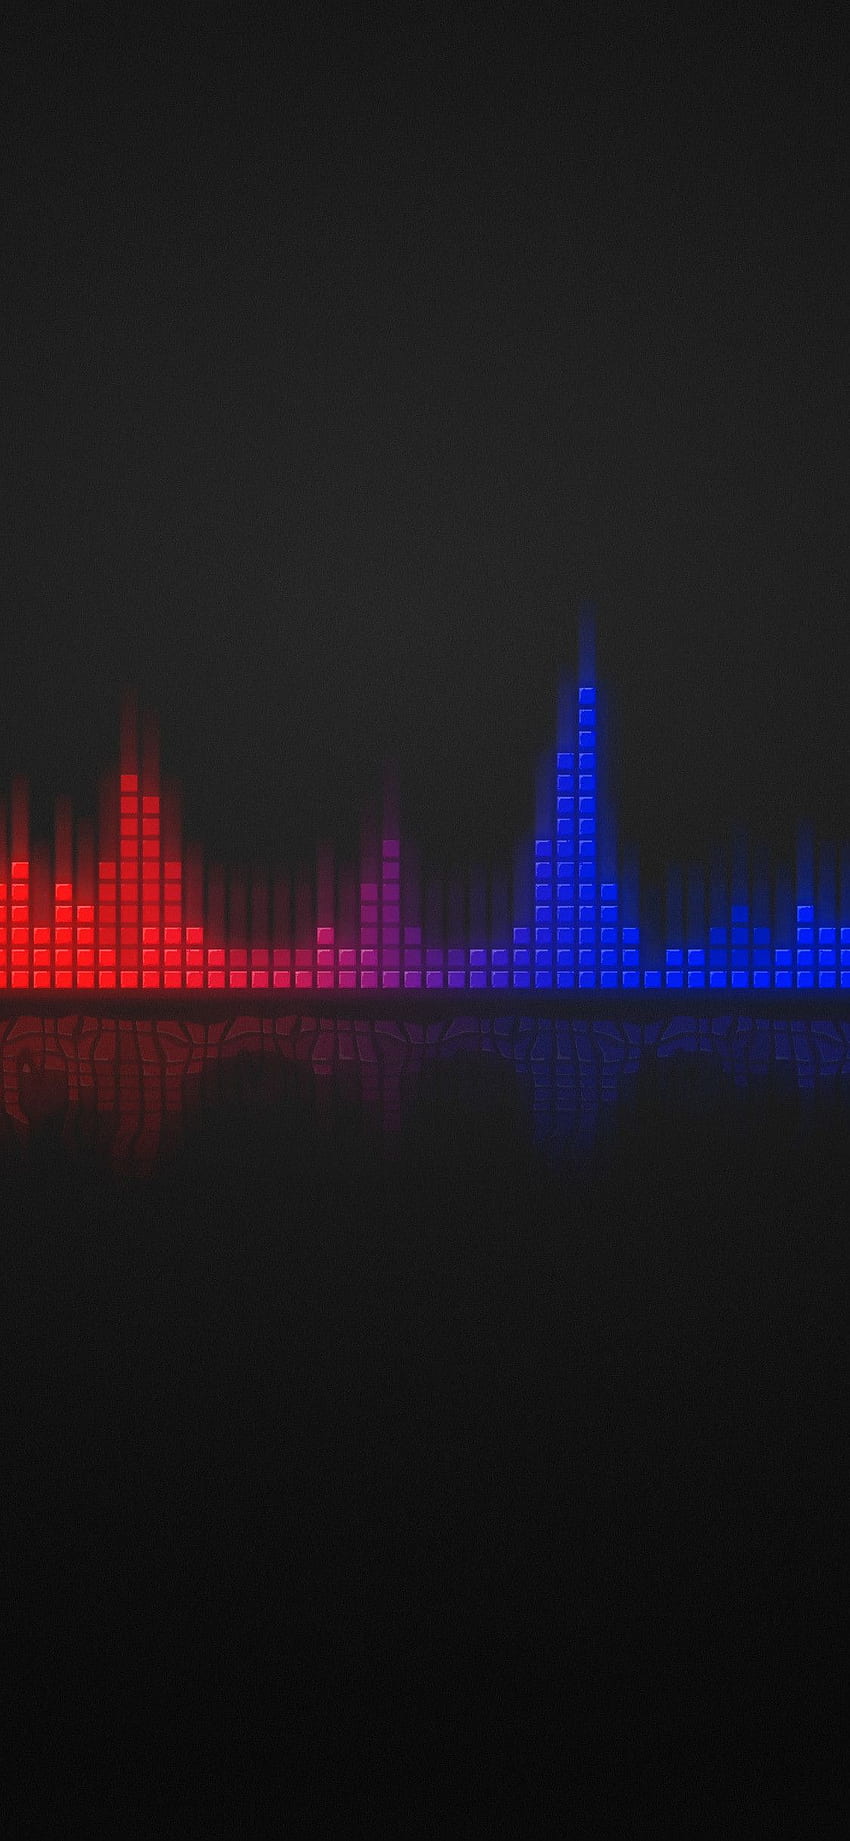 Music Live For Android - Equalizer HD phone wallpaper